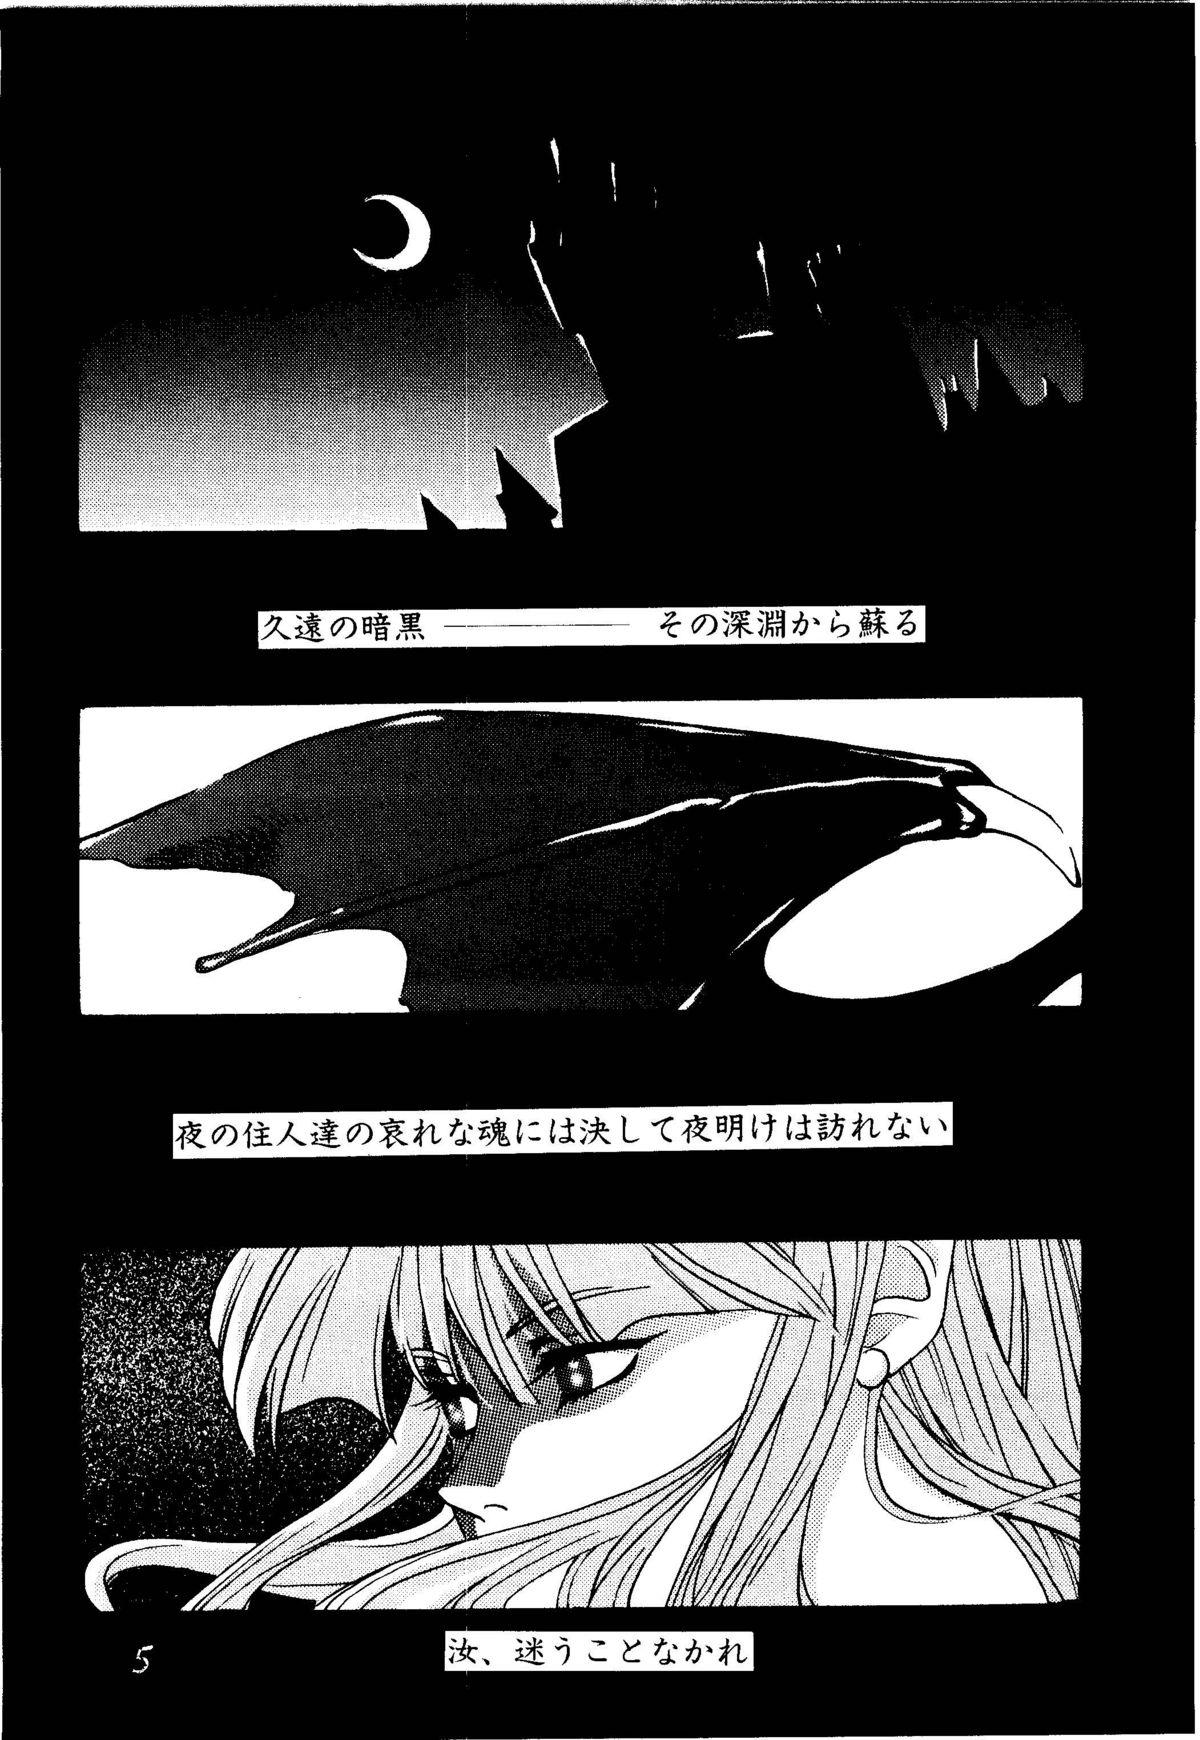 Hardcore Fucking Fire and Ice - Darkstalkers Ex Gf - Page 5